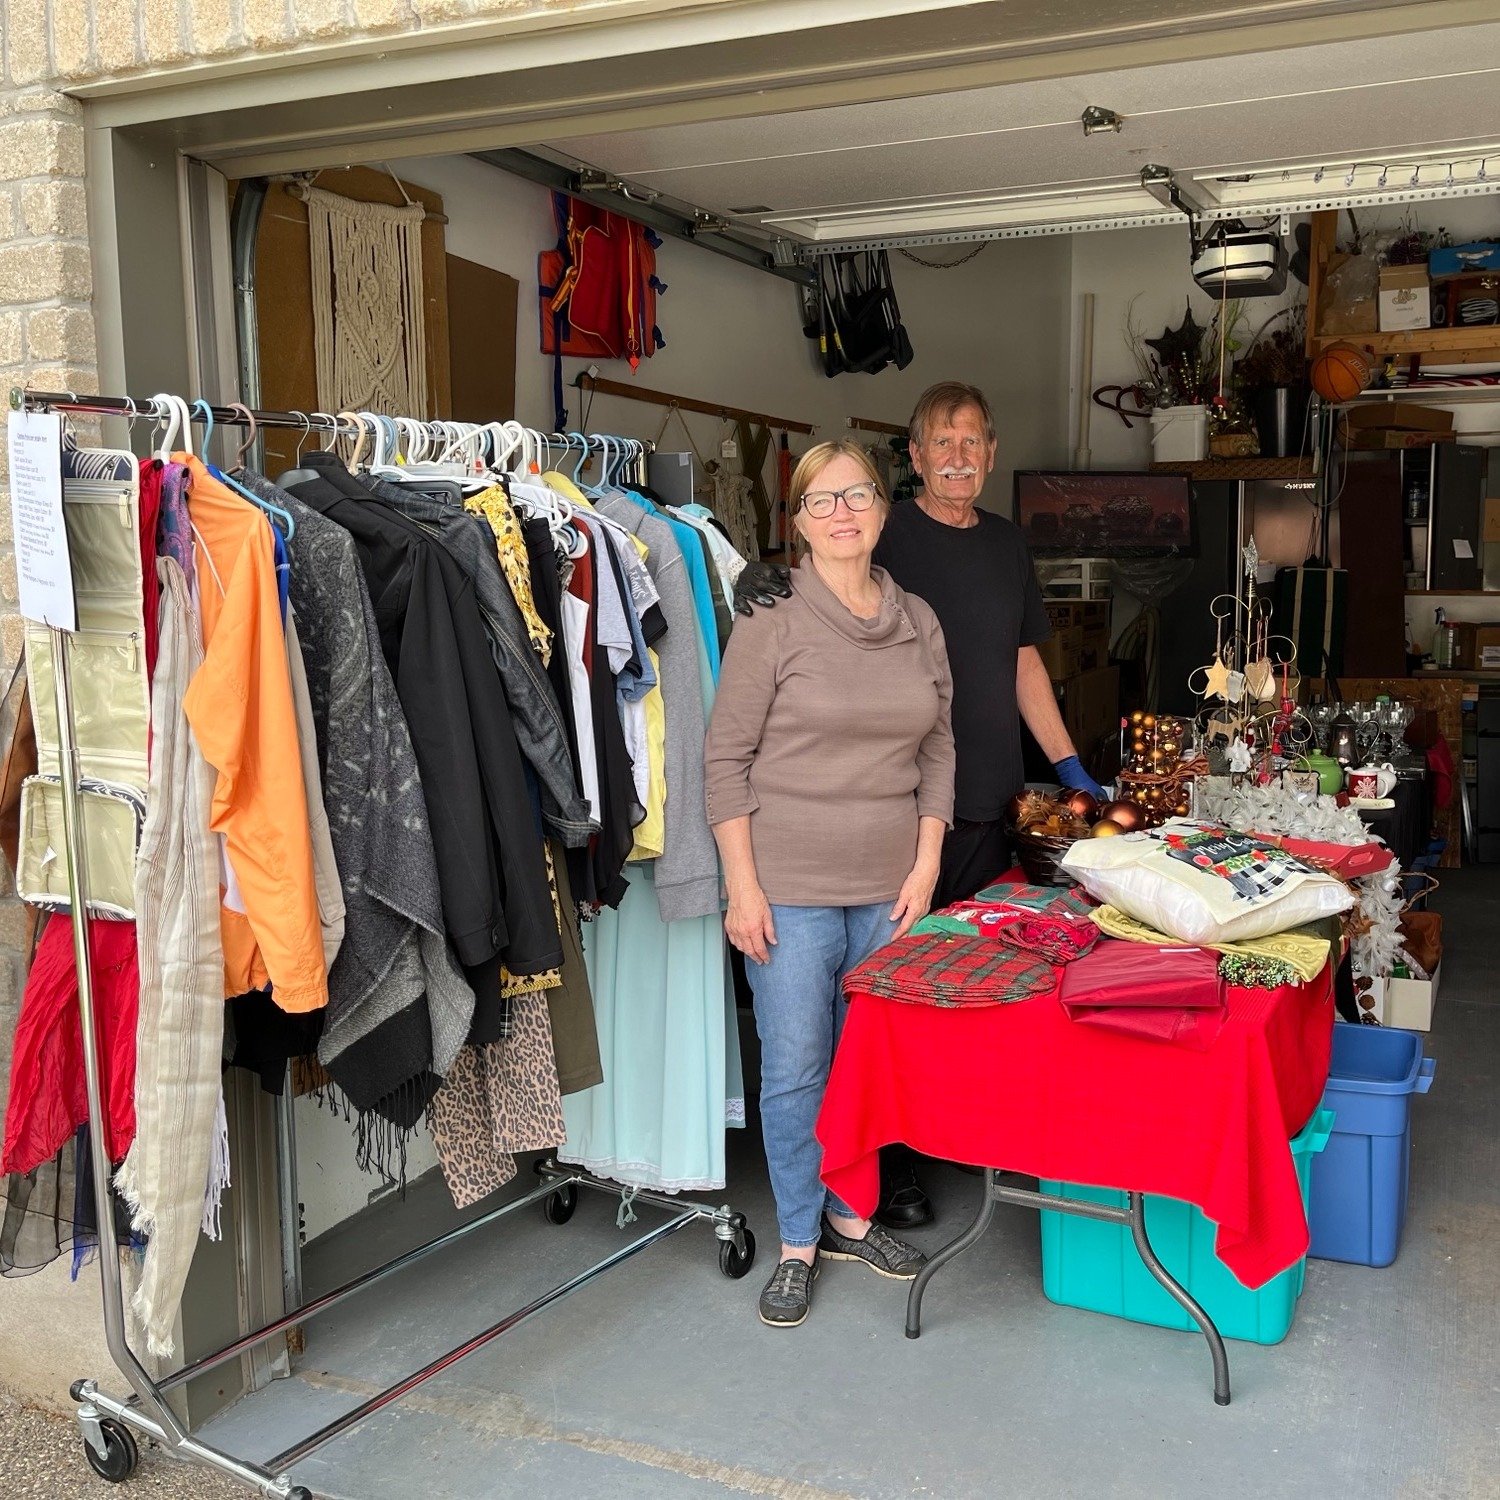 Saturday's weather didn't put a dampener on Roseanne's Garage Sale, she raised $1,060 which will go to Childcan's Early Literacy Program, including the Dolly Parton Imagination Library and books for kids while they're in hospital. Thank you so much R